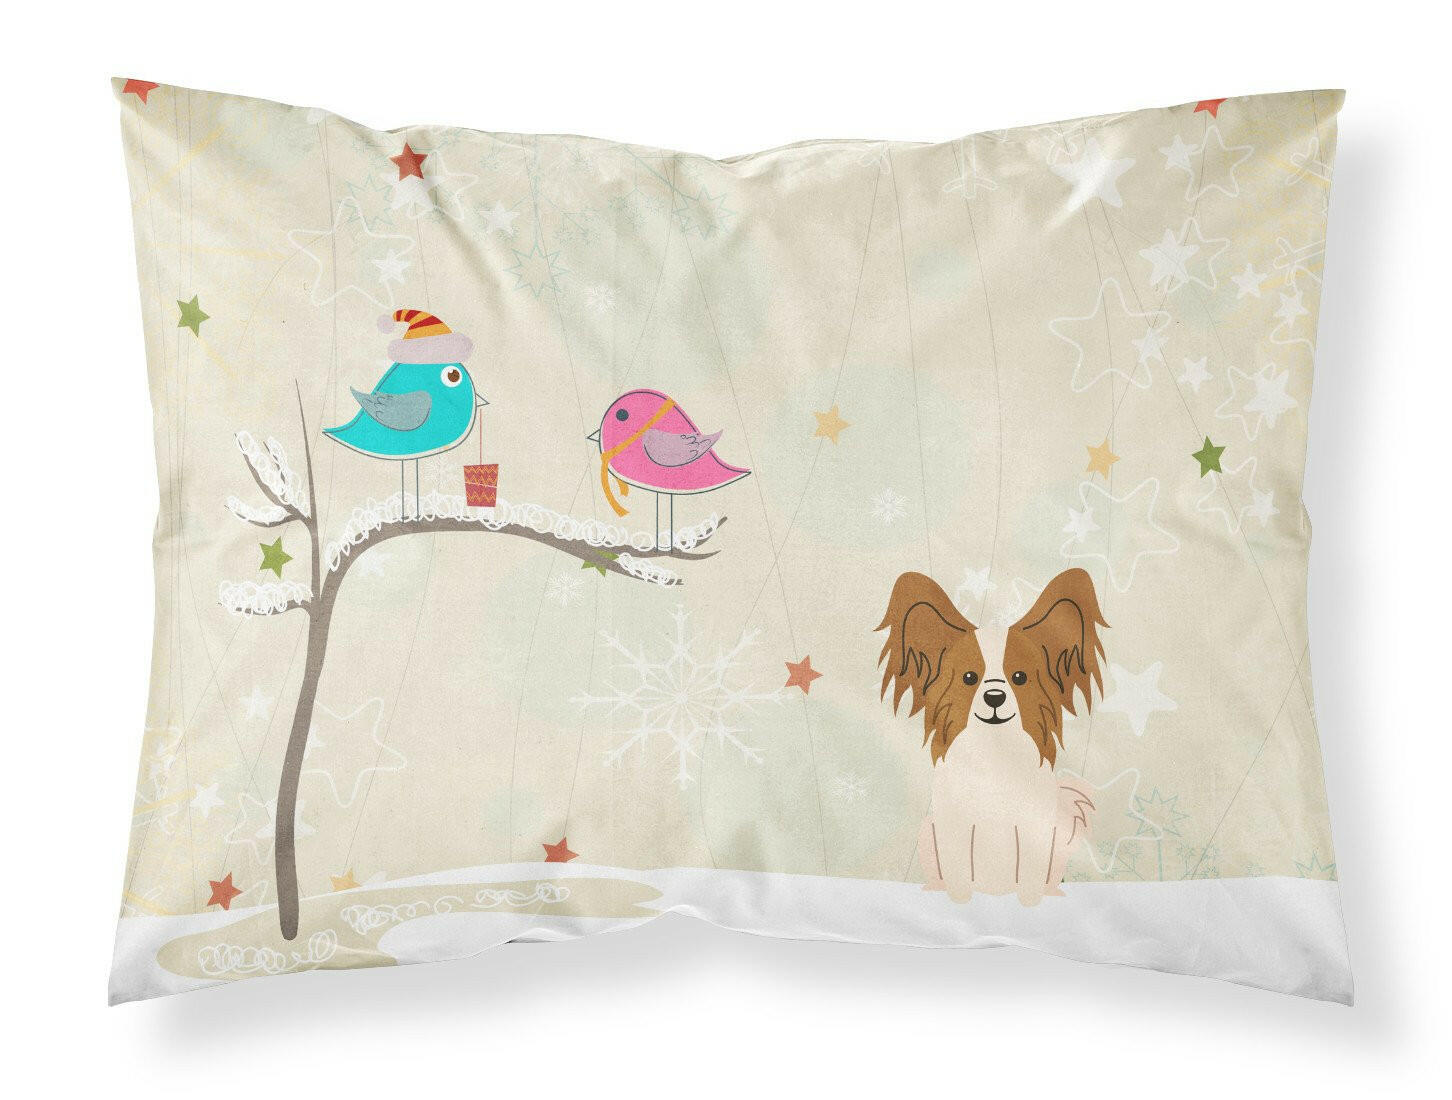 Christmas Presents between Friends Papillon Red White Fabric Standard Pillowcase BB2550PILLOWCASE by Caroline's Treasures